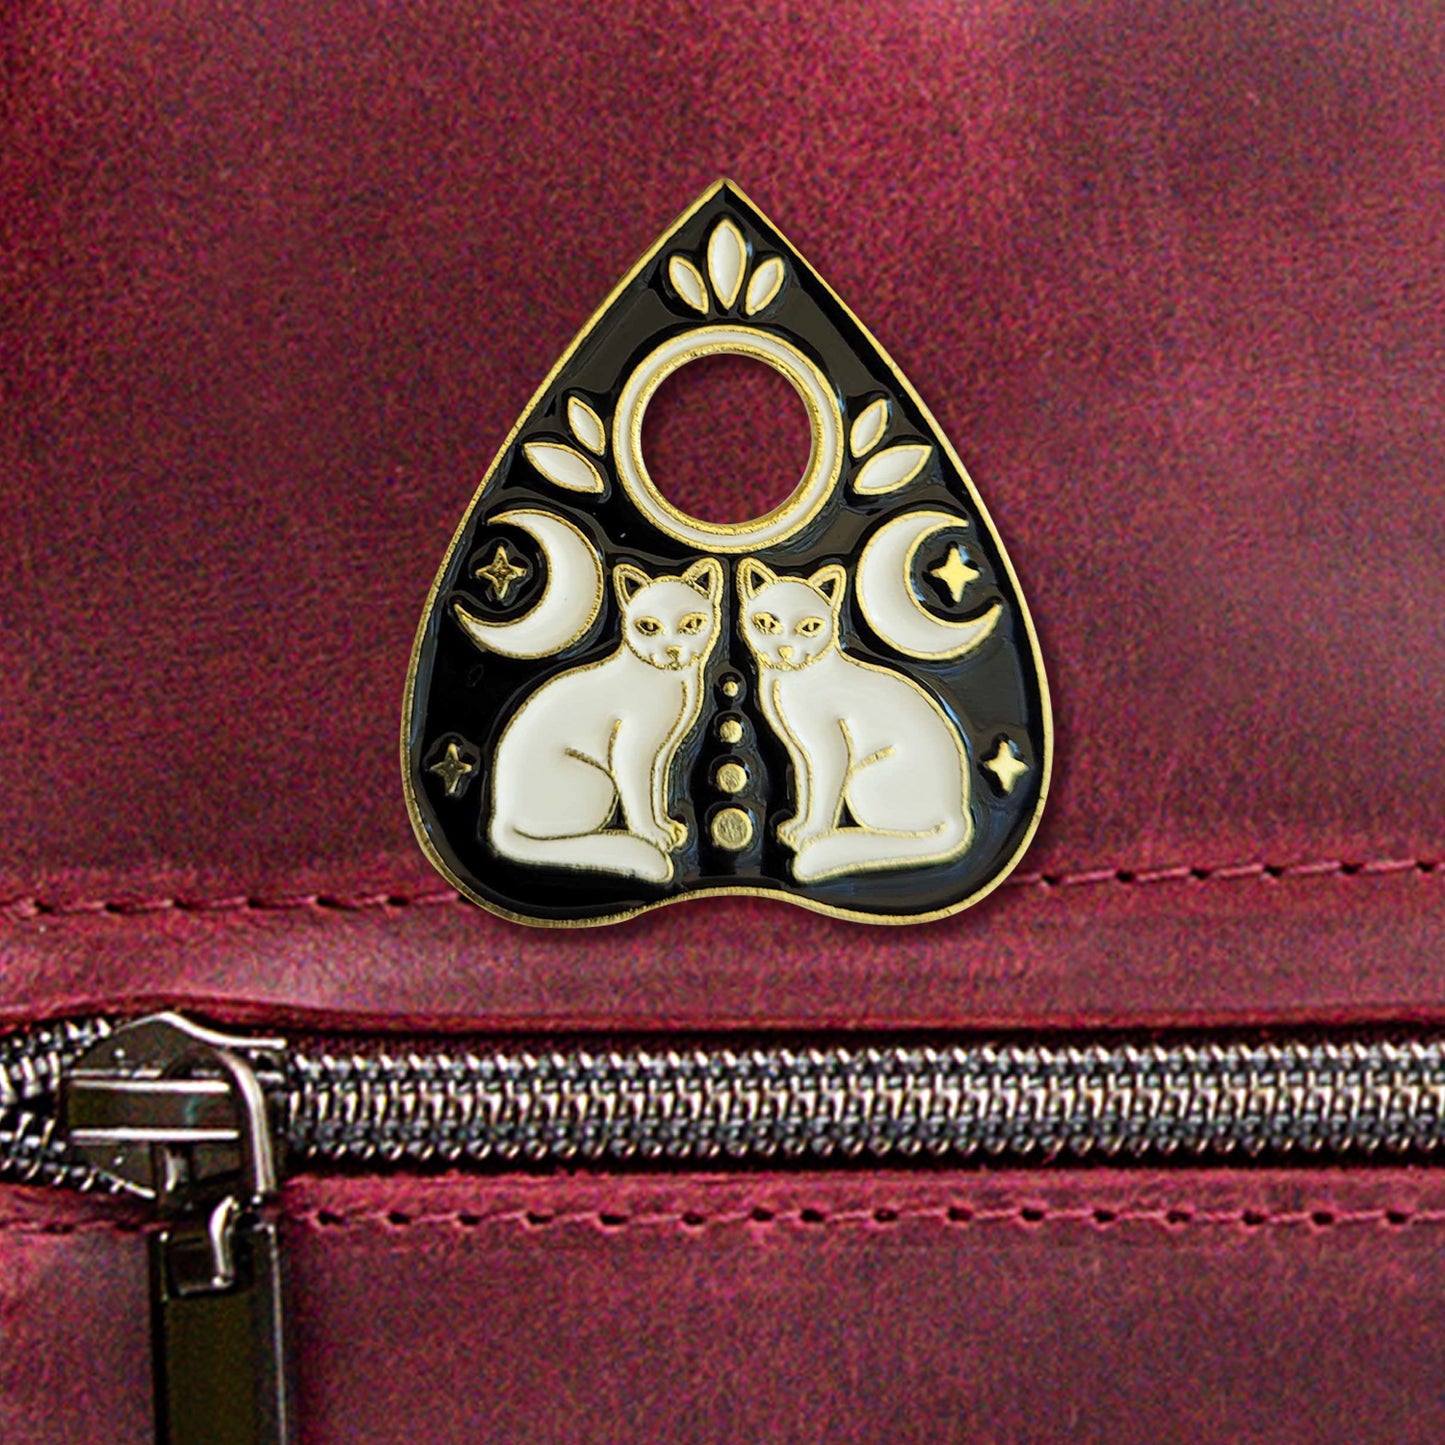 A close-up photo of a black-and-gold enamel pin in the shape of a planchette. The pin depicts two identical white cats facing each other, each with a moon and two small stars above/around them.